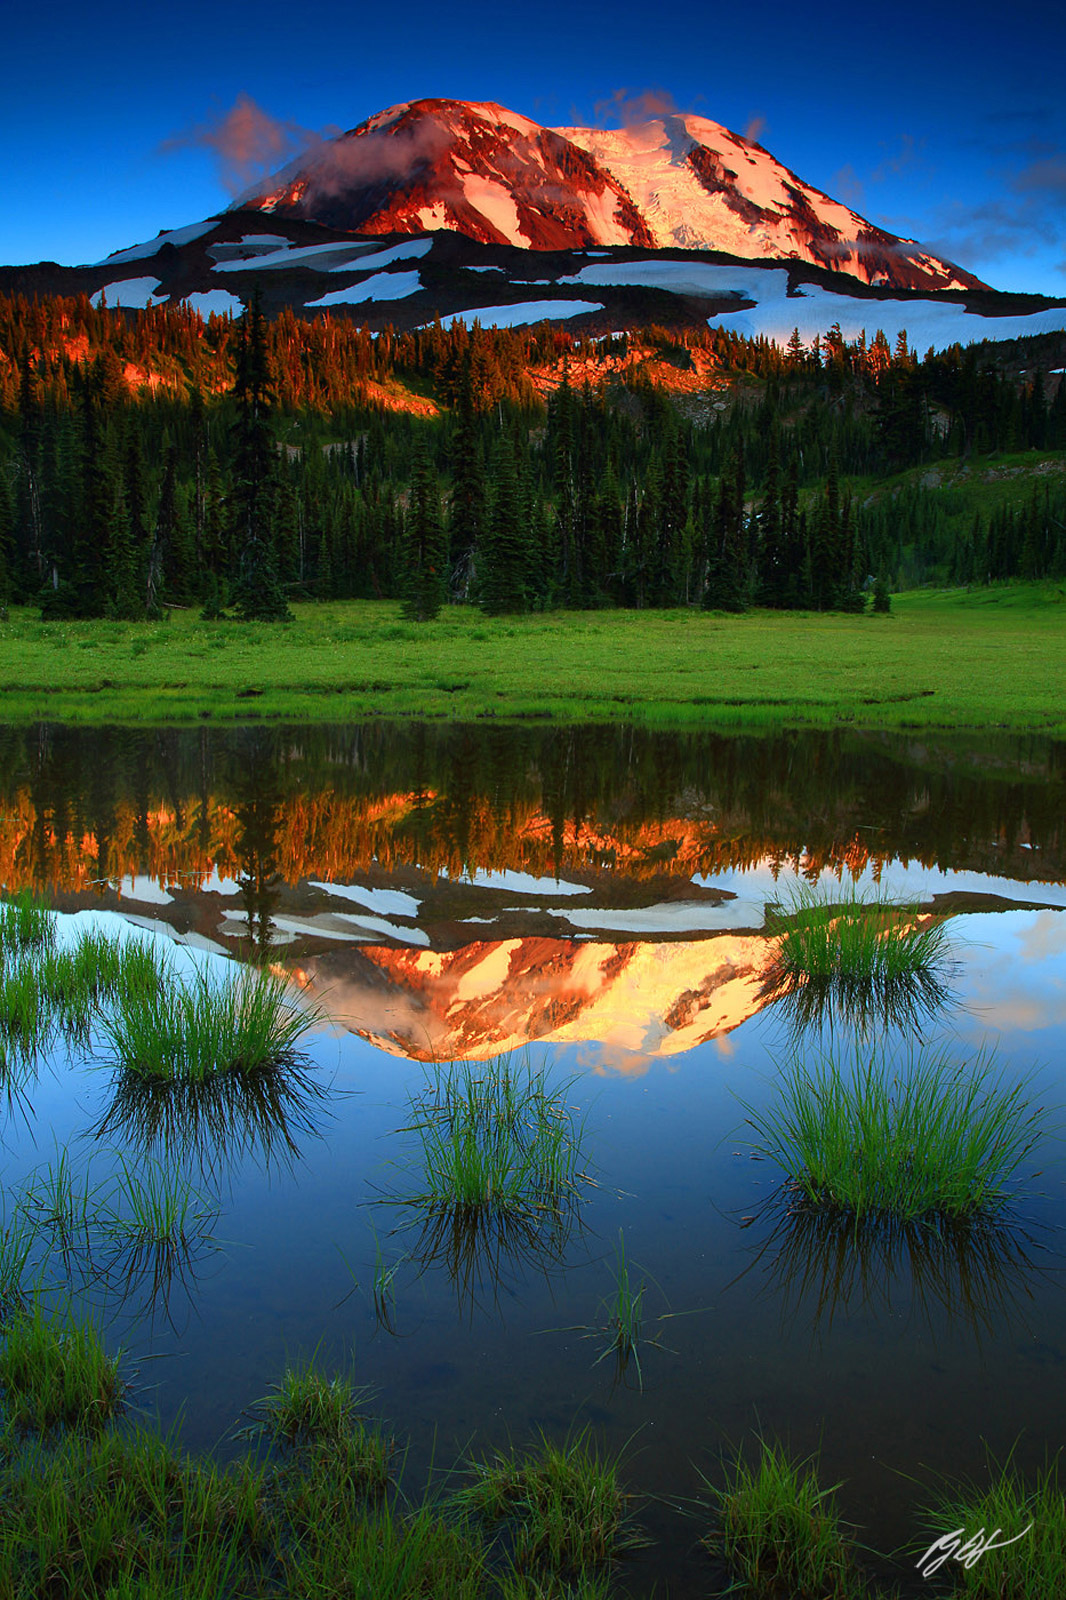 Sunset Mt Adams Reflected in a Tarn from High Camp in the Mt Adams Wilderness in Washington